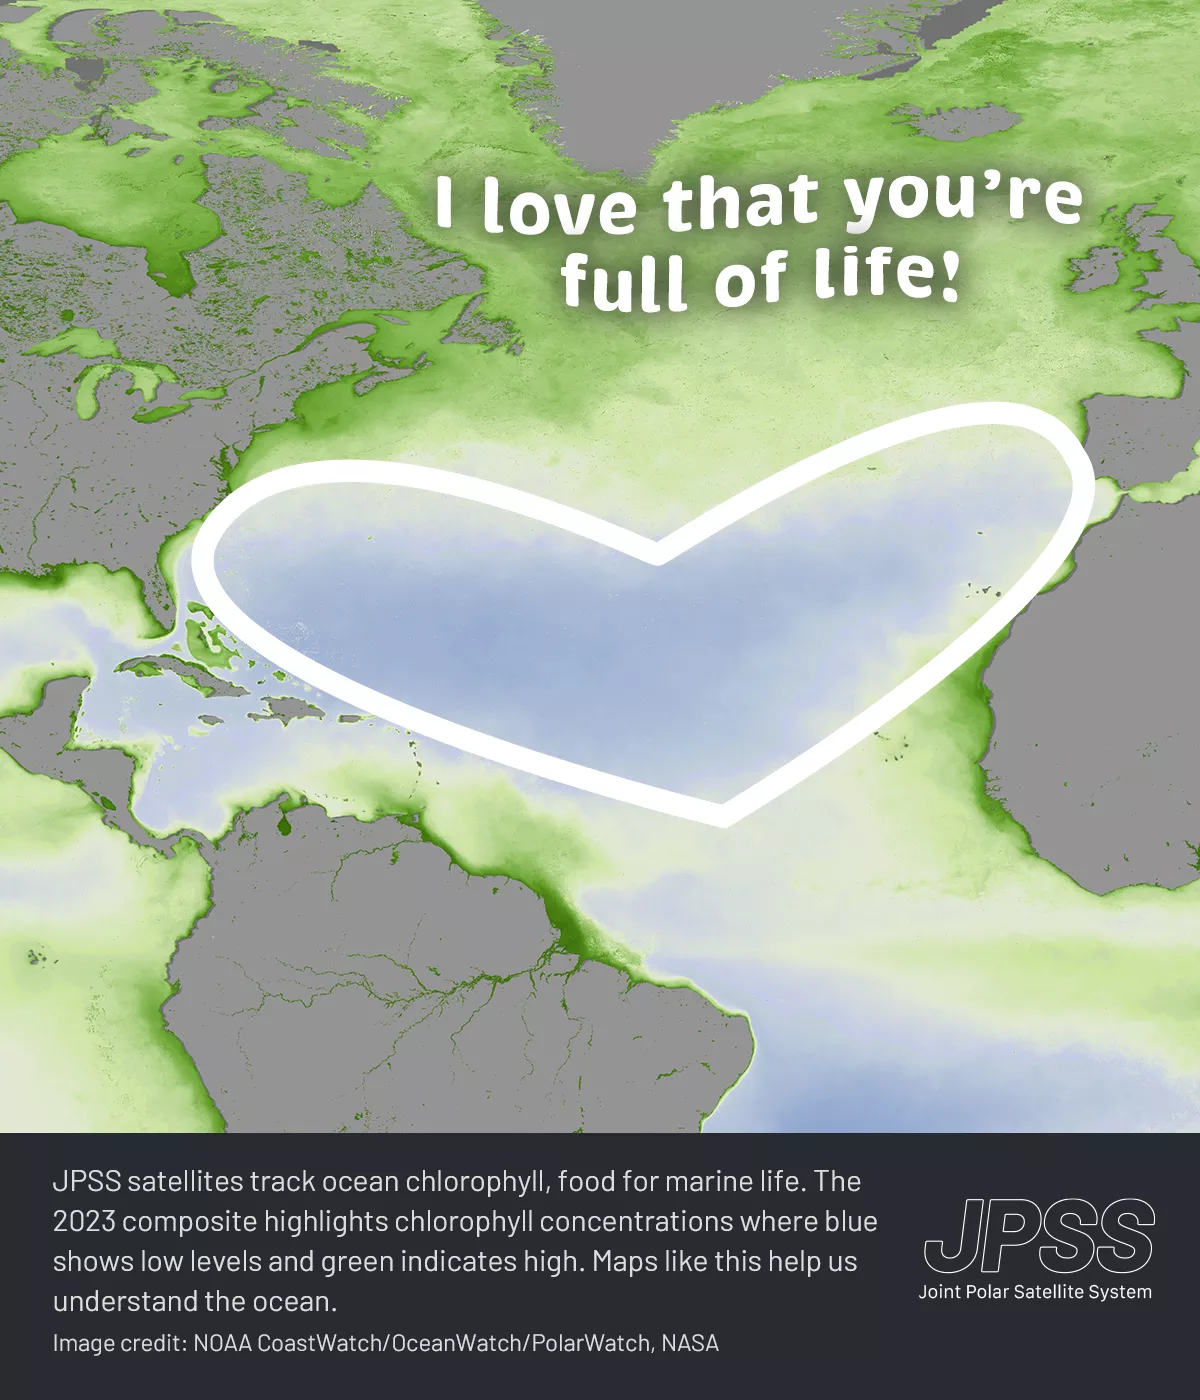 A Valentine's Day card displaying a satellite composite image from 2023, with data provided by the Joint Polar Satellite System (JPSS). The image illustrates ocean chlorophyll concentration, with various shades of green showing high levels and patches of blue signifying lower levels. A prominent white heart outline is layered on top of the image, complemented by the message “I love that you're full of life!” written above. The card includes a caption that reads, “JPSS satellites track ocean chlorophyll, foo